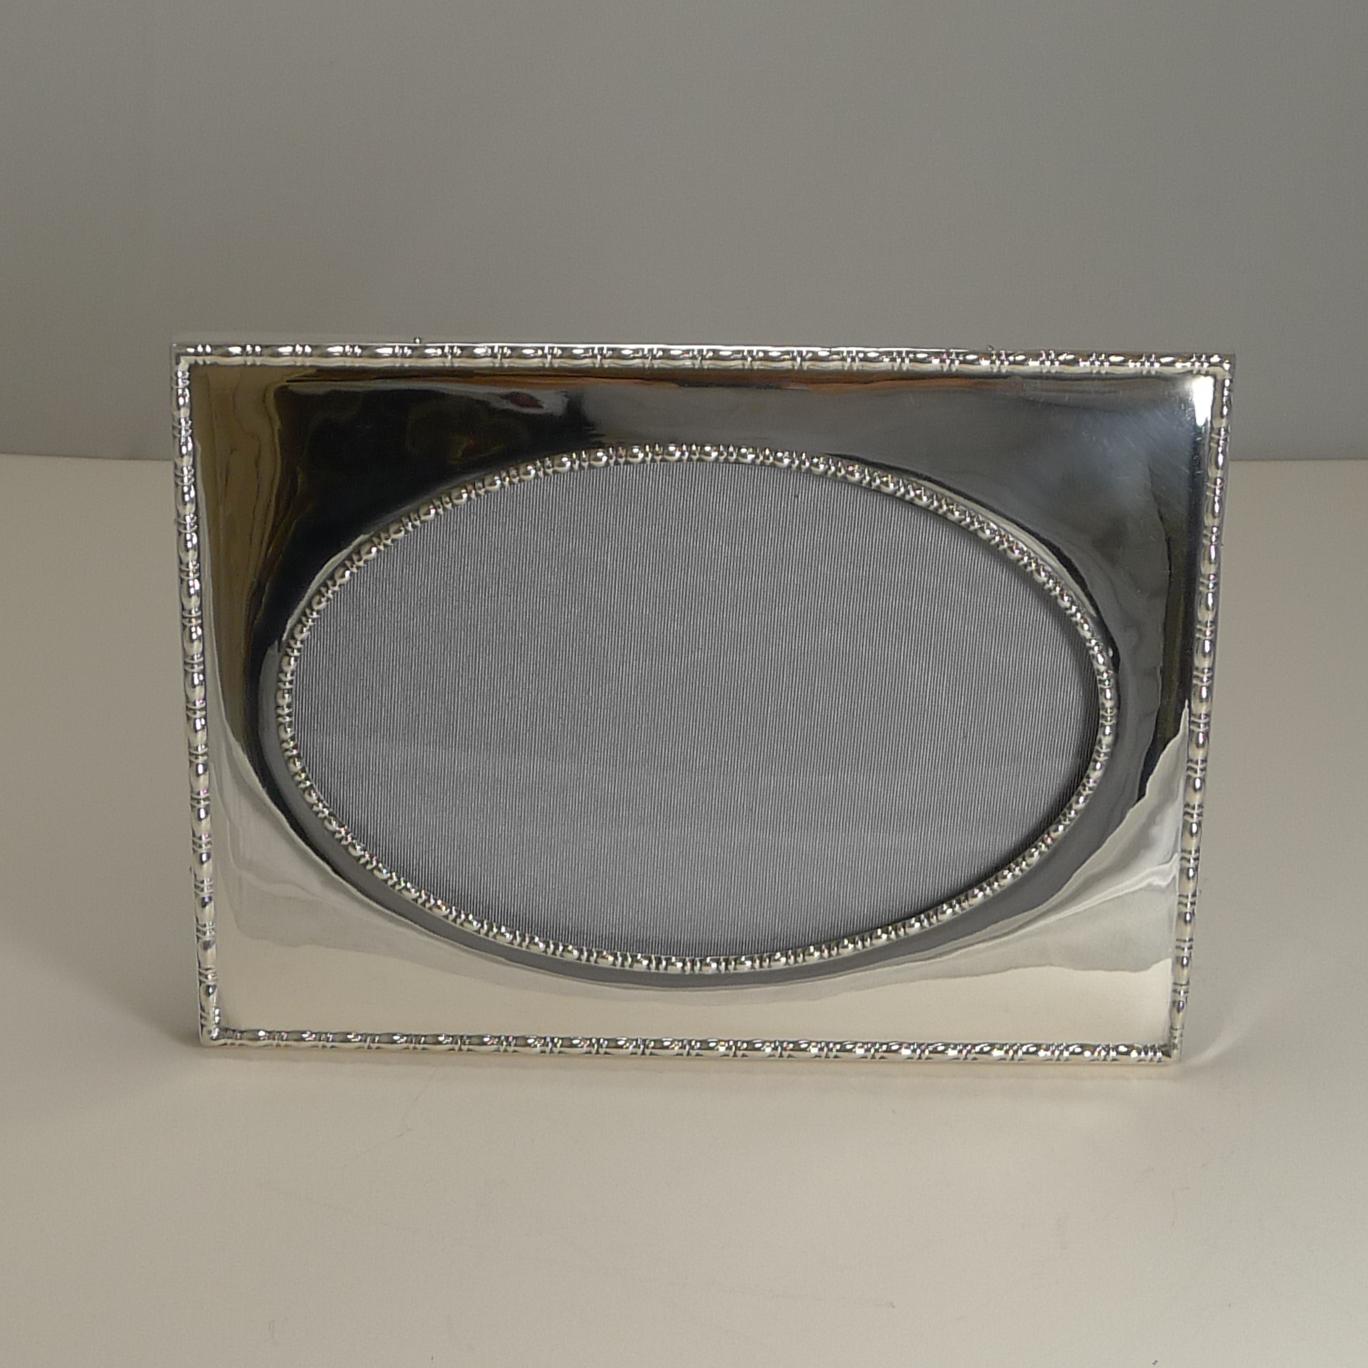 A very smart antique photograph frame made from English sterling silver with a fabulous raised border to the outer edge and surrounding the oval aperture.

This is a two-way picture, highly sought-after, being able to use it in either a landscape